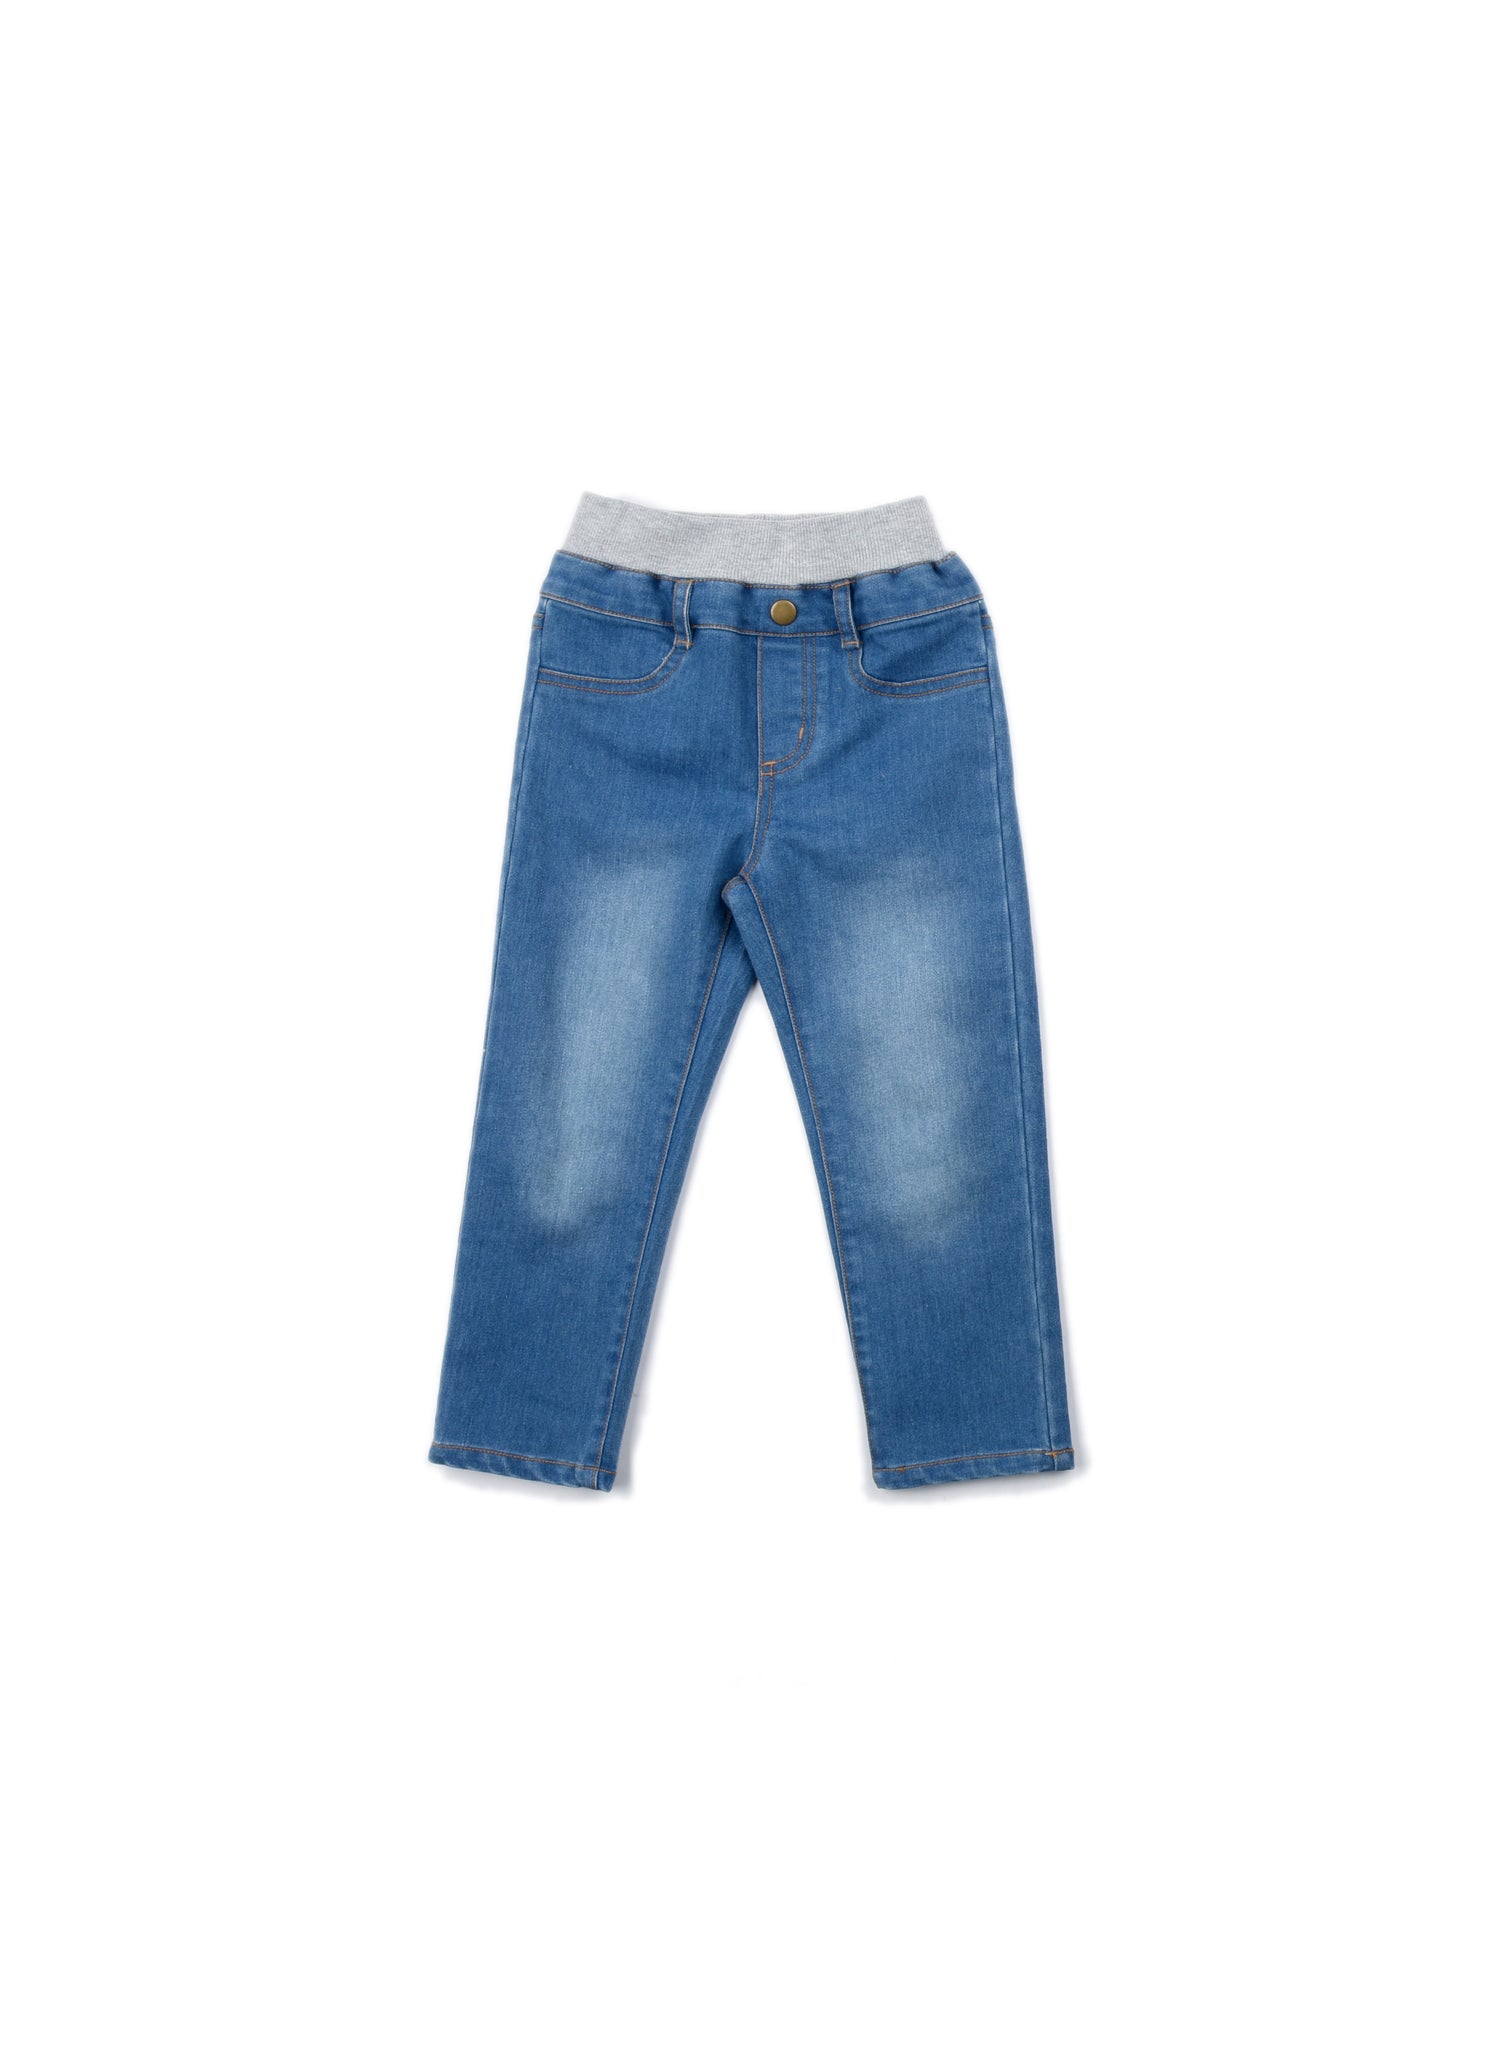 EGG BABY Denim Pants with Knit Waist